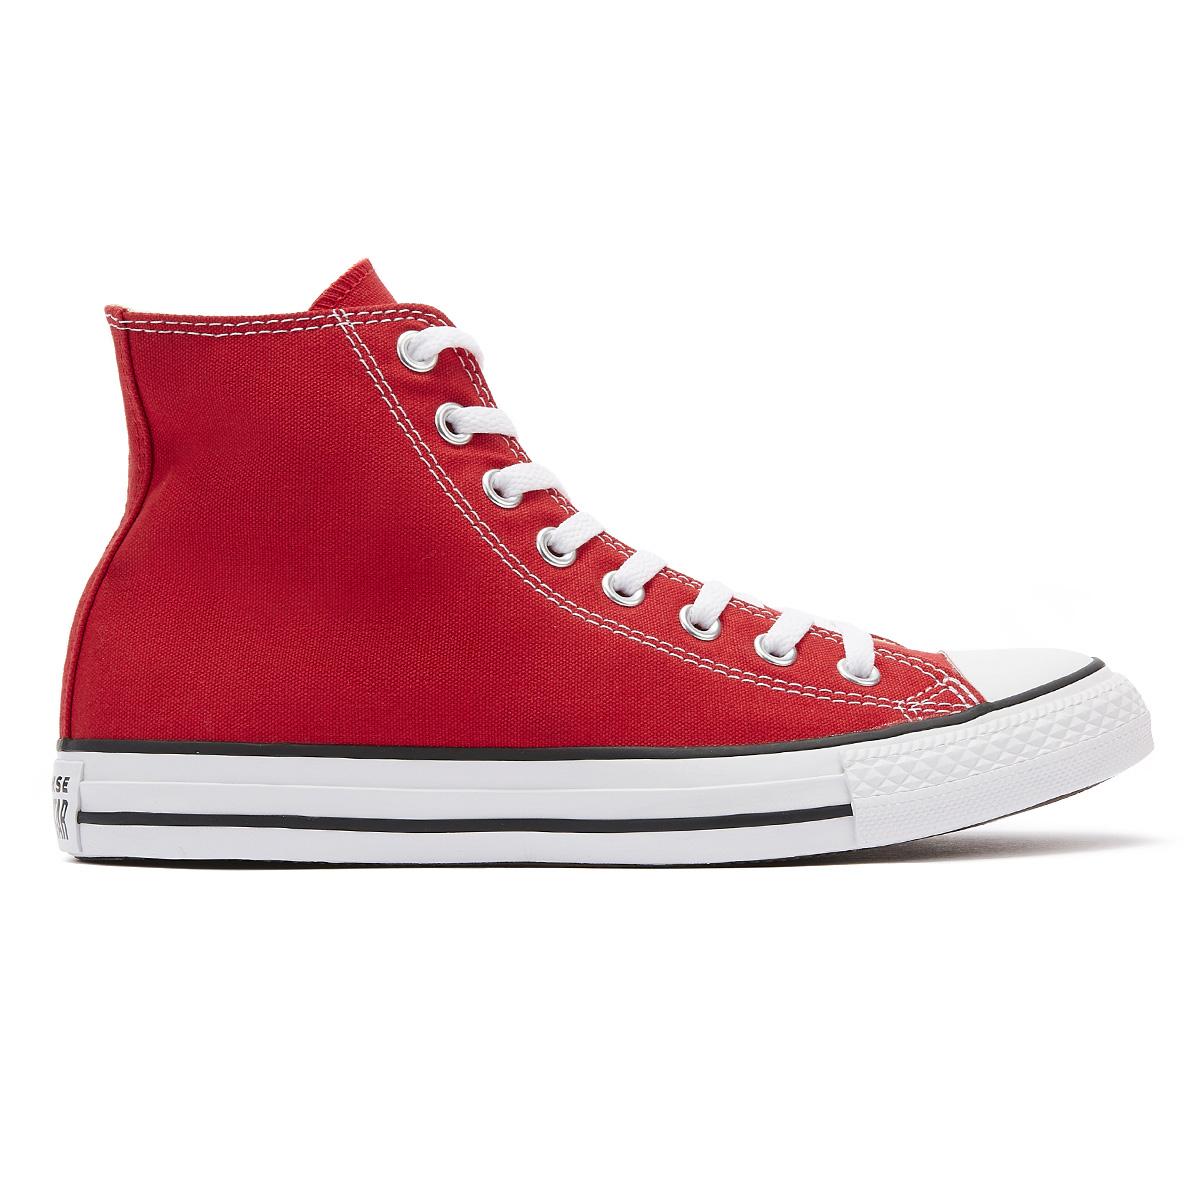 Converse Canvas All Star Red Hi Trainers - Lyst